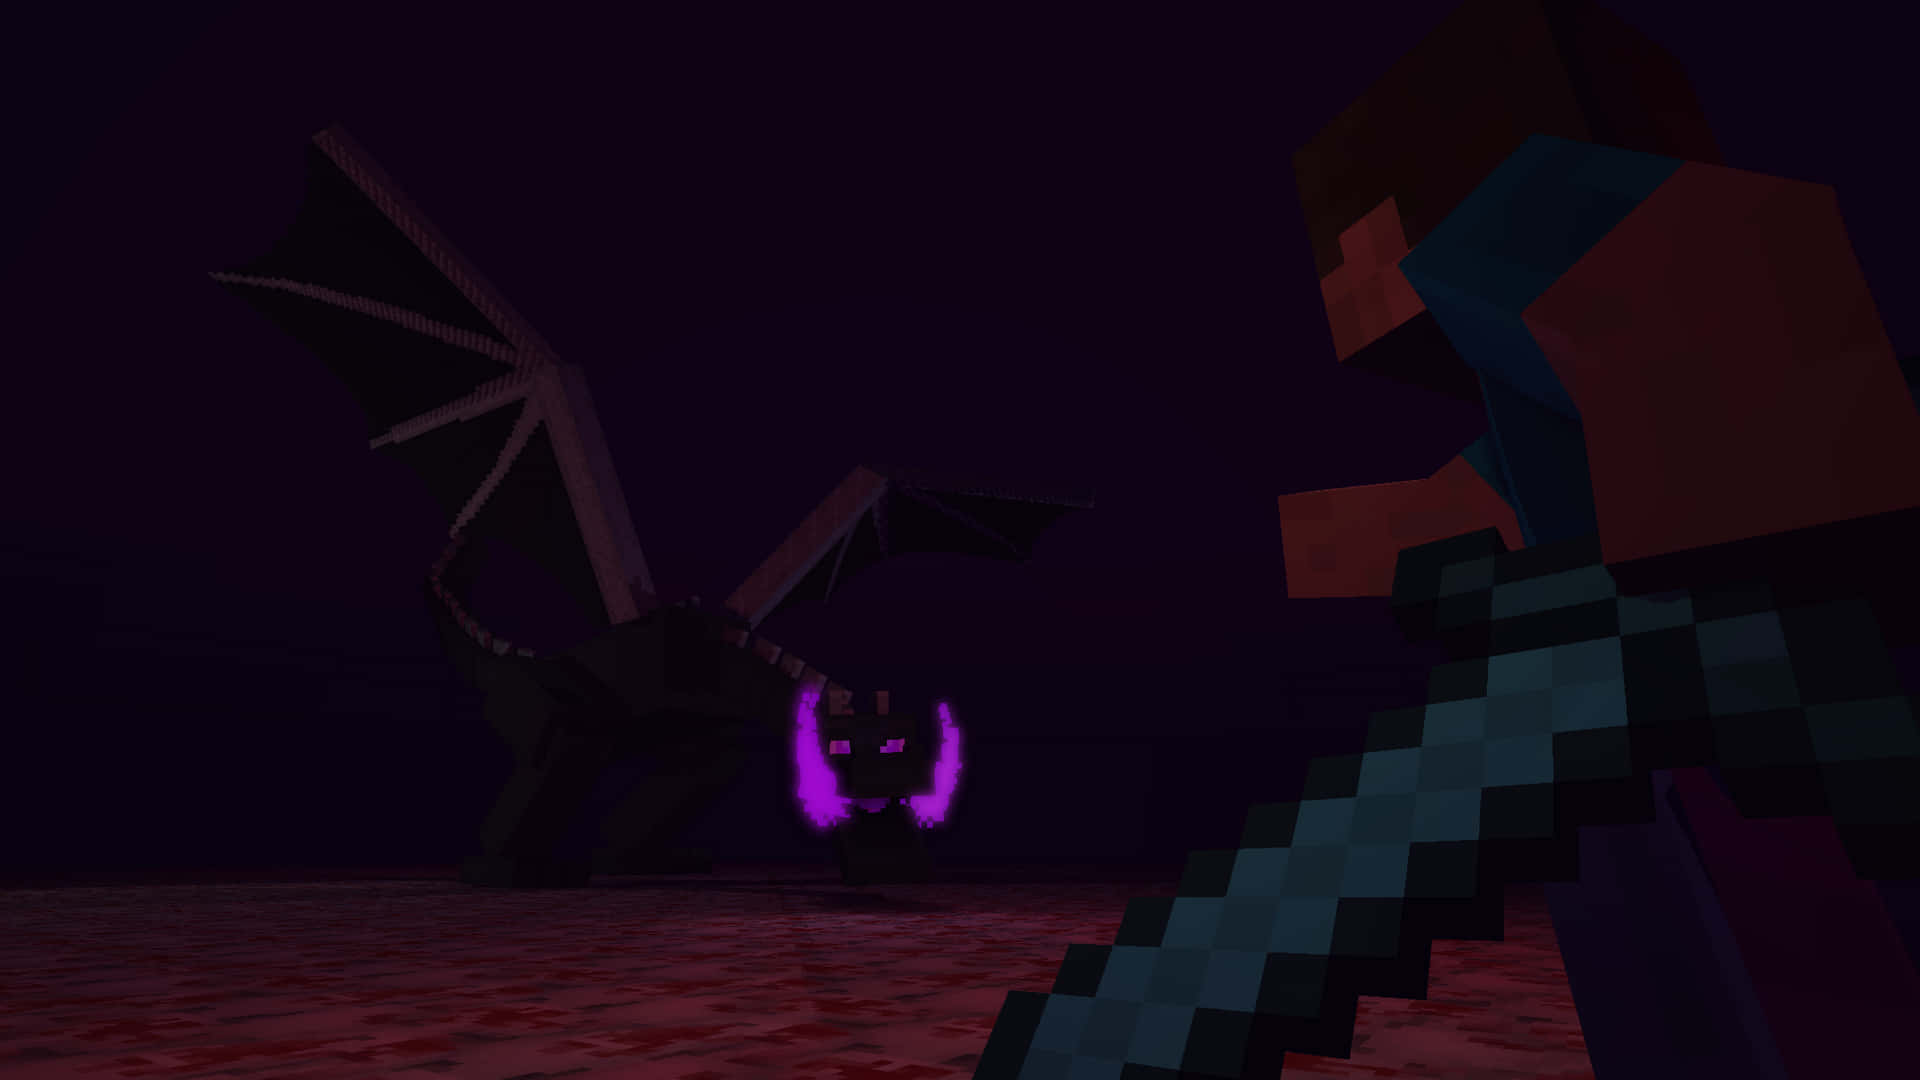 "The Ender Dragon, one of the toughest bosses to face in the game of Minecraft" Wallpaper